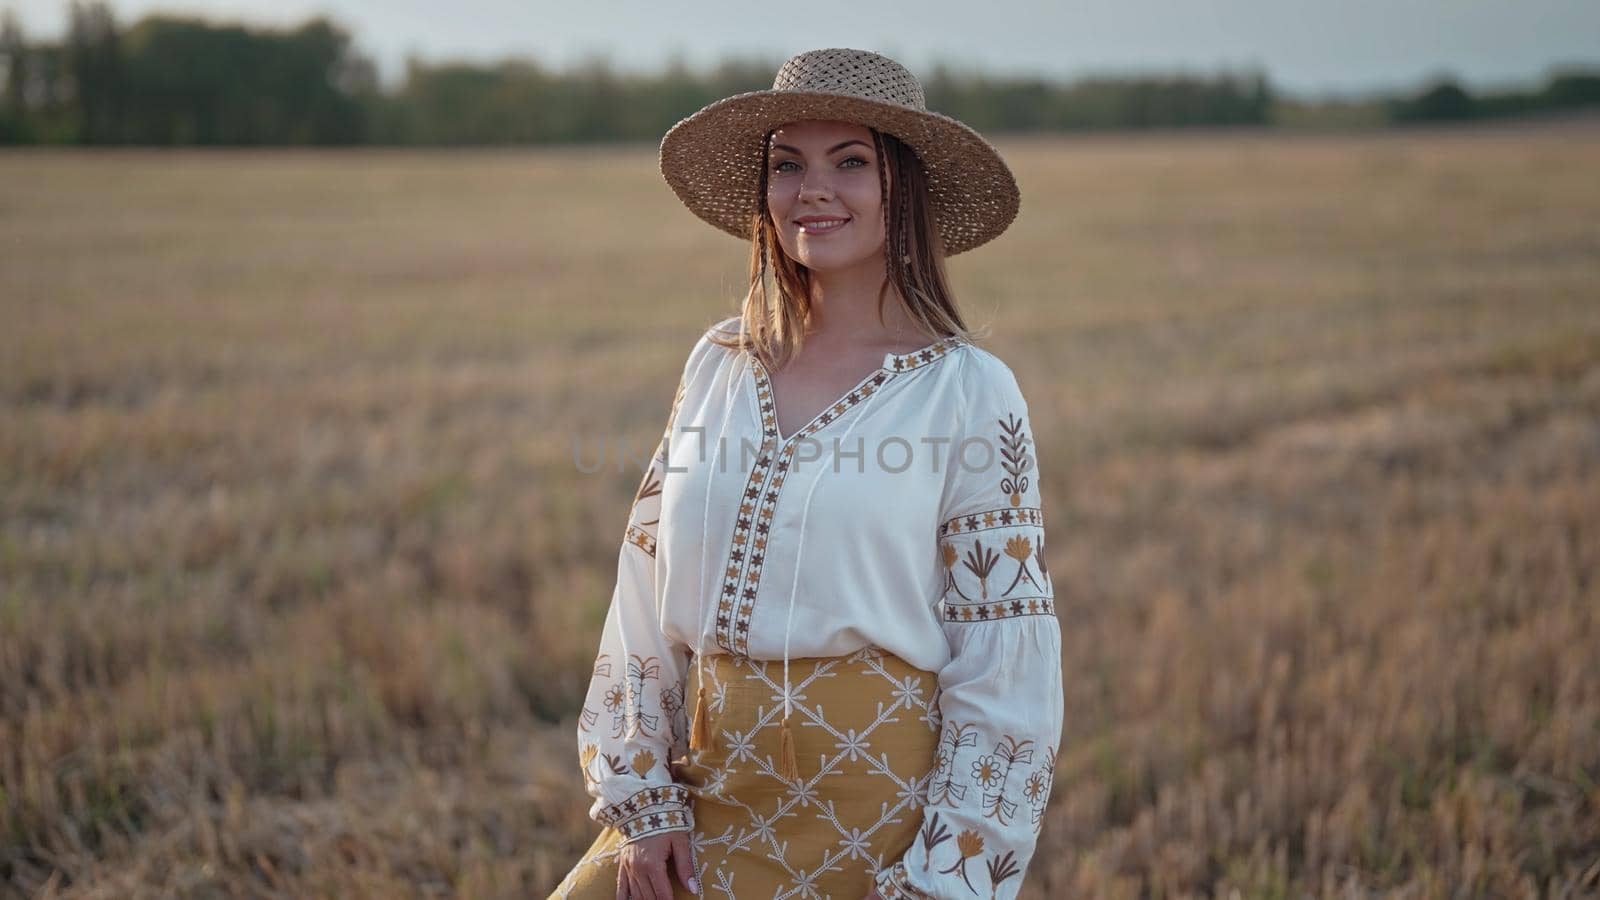 Portrait of ukrainian woman in wheat field after harvesting. Attractive cheerful lady in embroidery vyshyvanka blouse and straw hat. Ukraine, independence, freedom, patriot symbol, charming girl by kristina_kokhanova